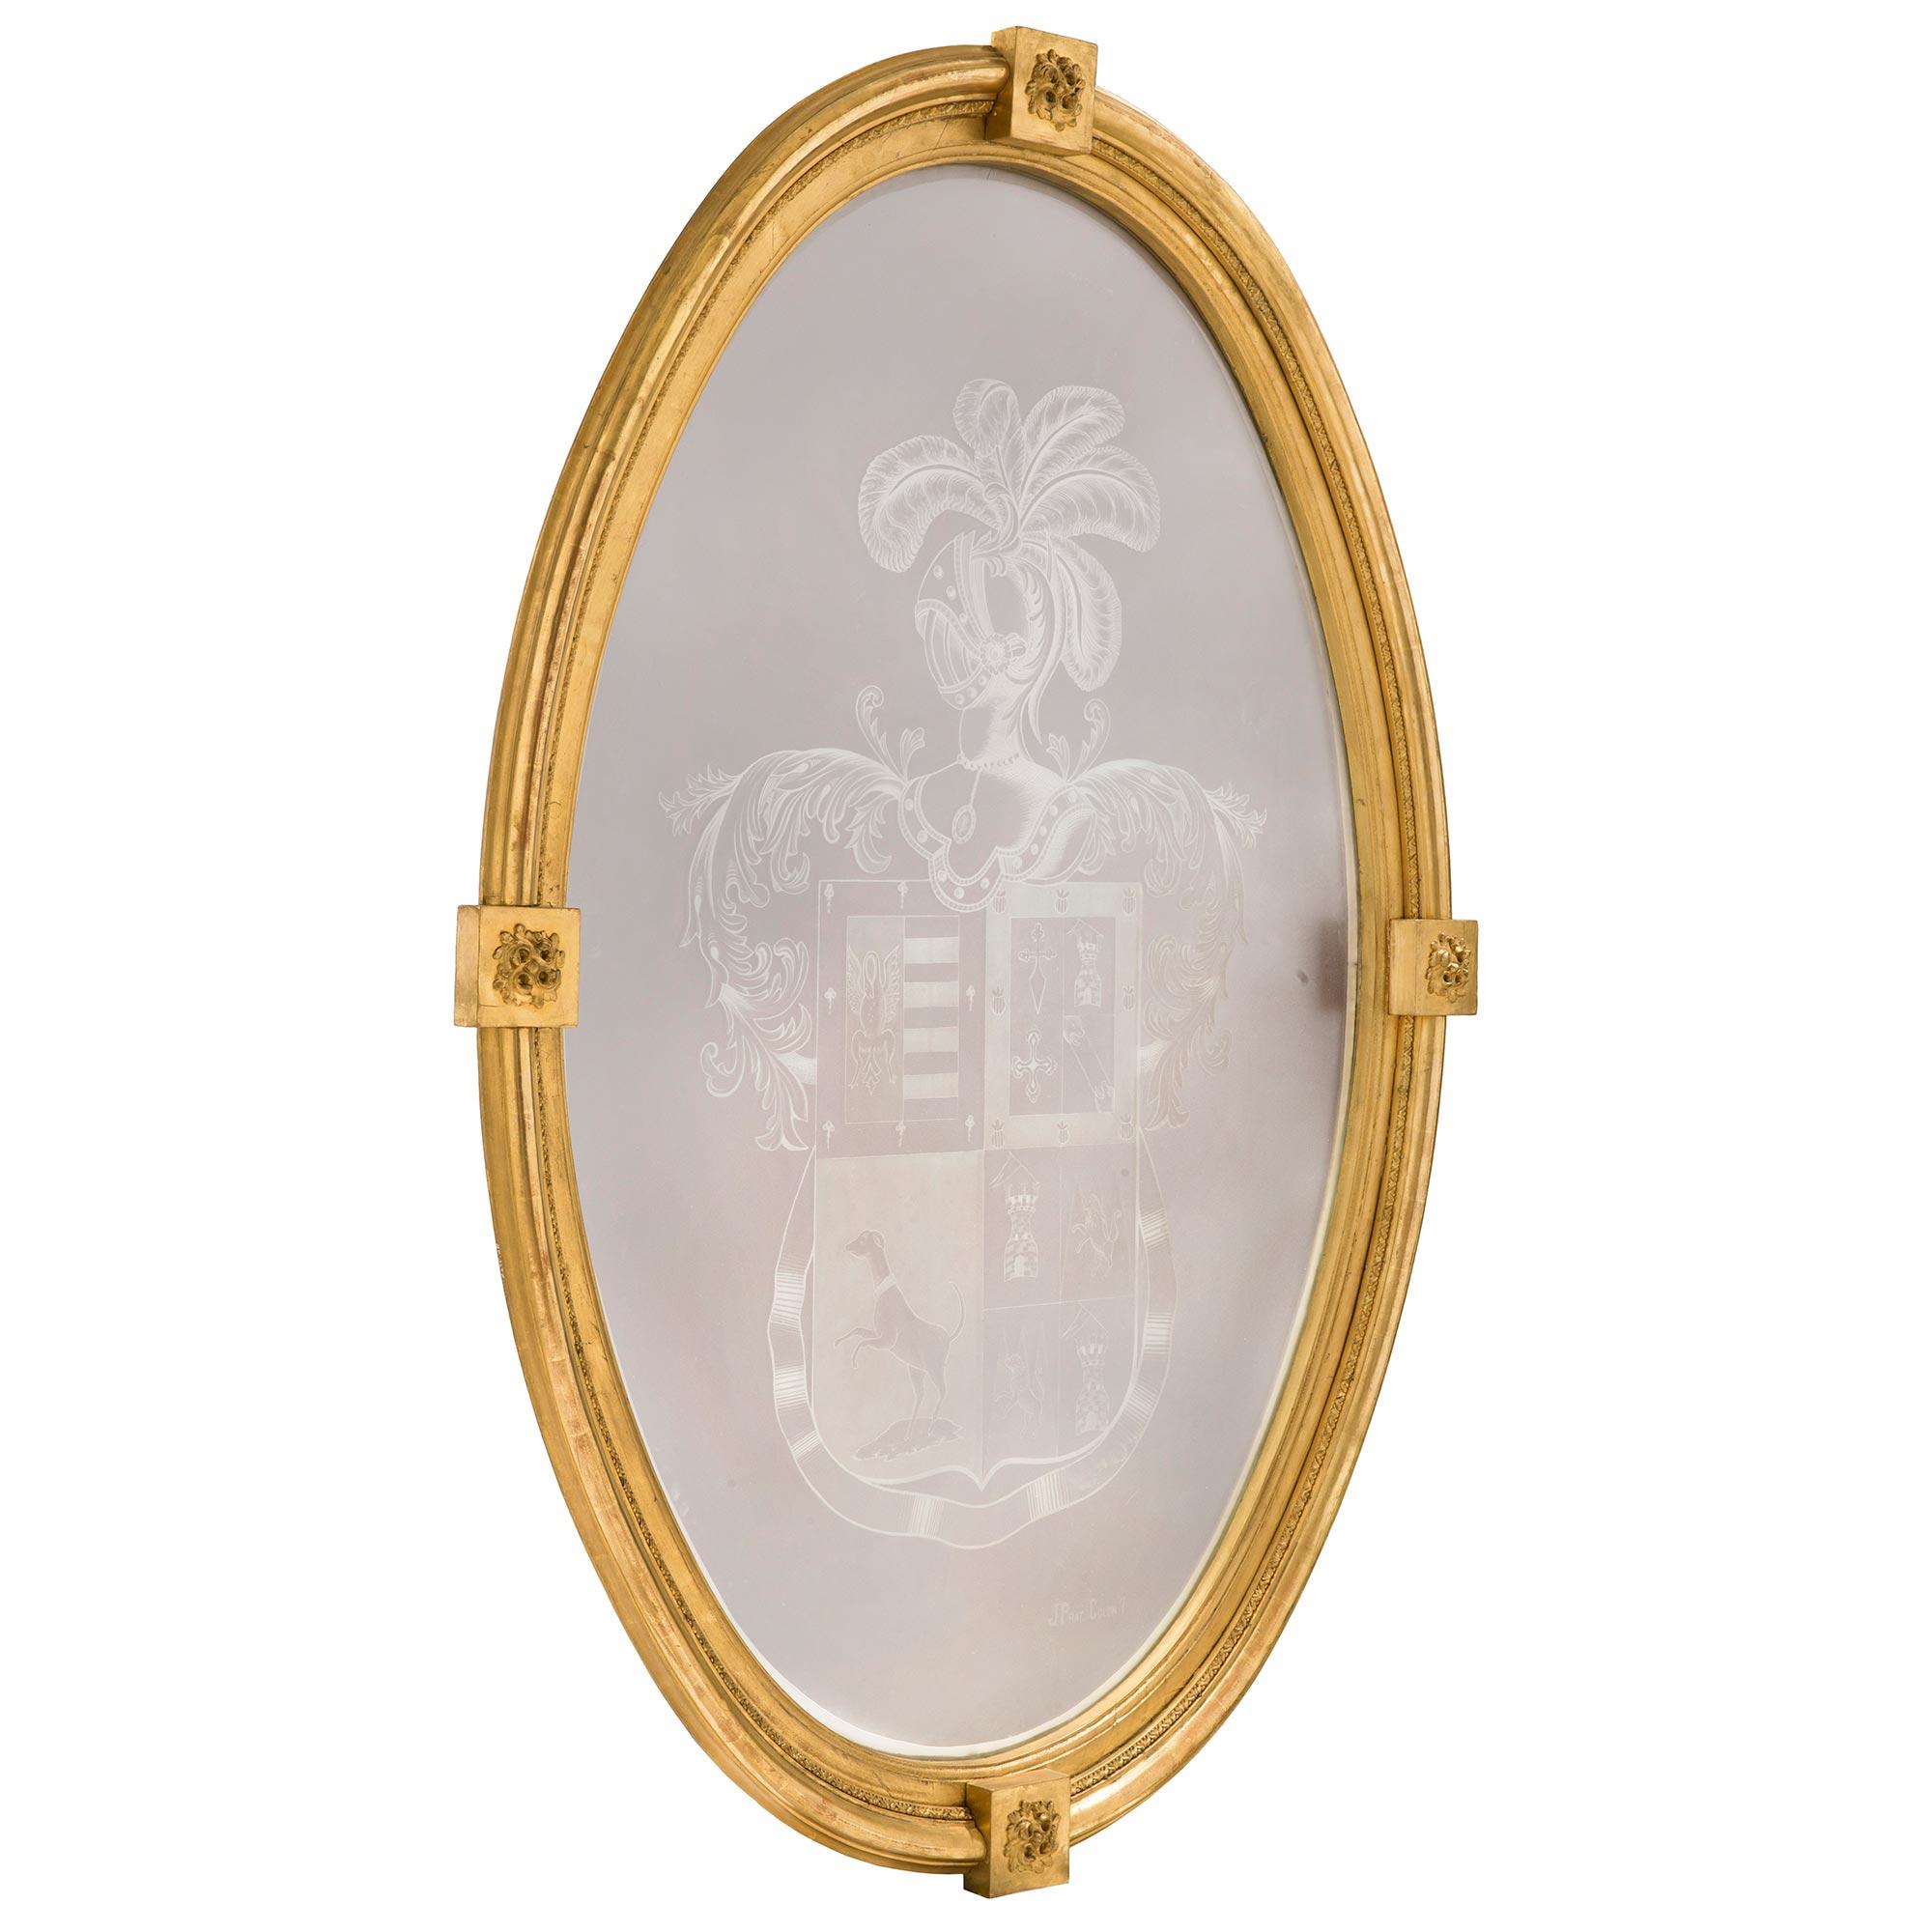 A unique and extremely decorative Italian 19th century etched frosted glass and giltwood plaque signed J. Prat. Colon 7. The large scale wall decor retains its original beautiful frosted glass pane with a finely detailed family crest etched design.